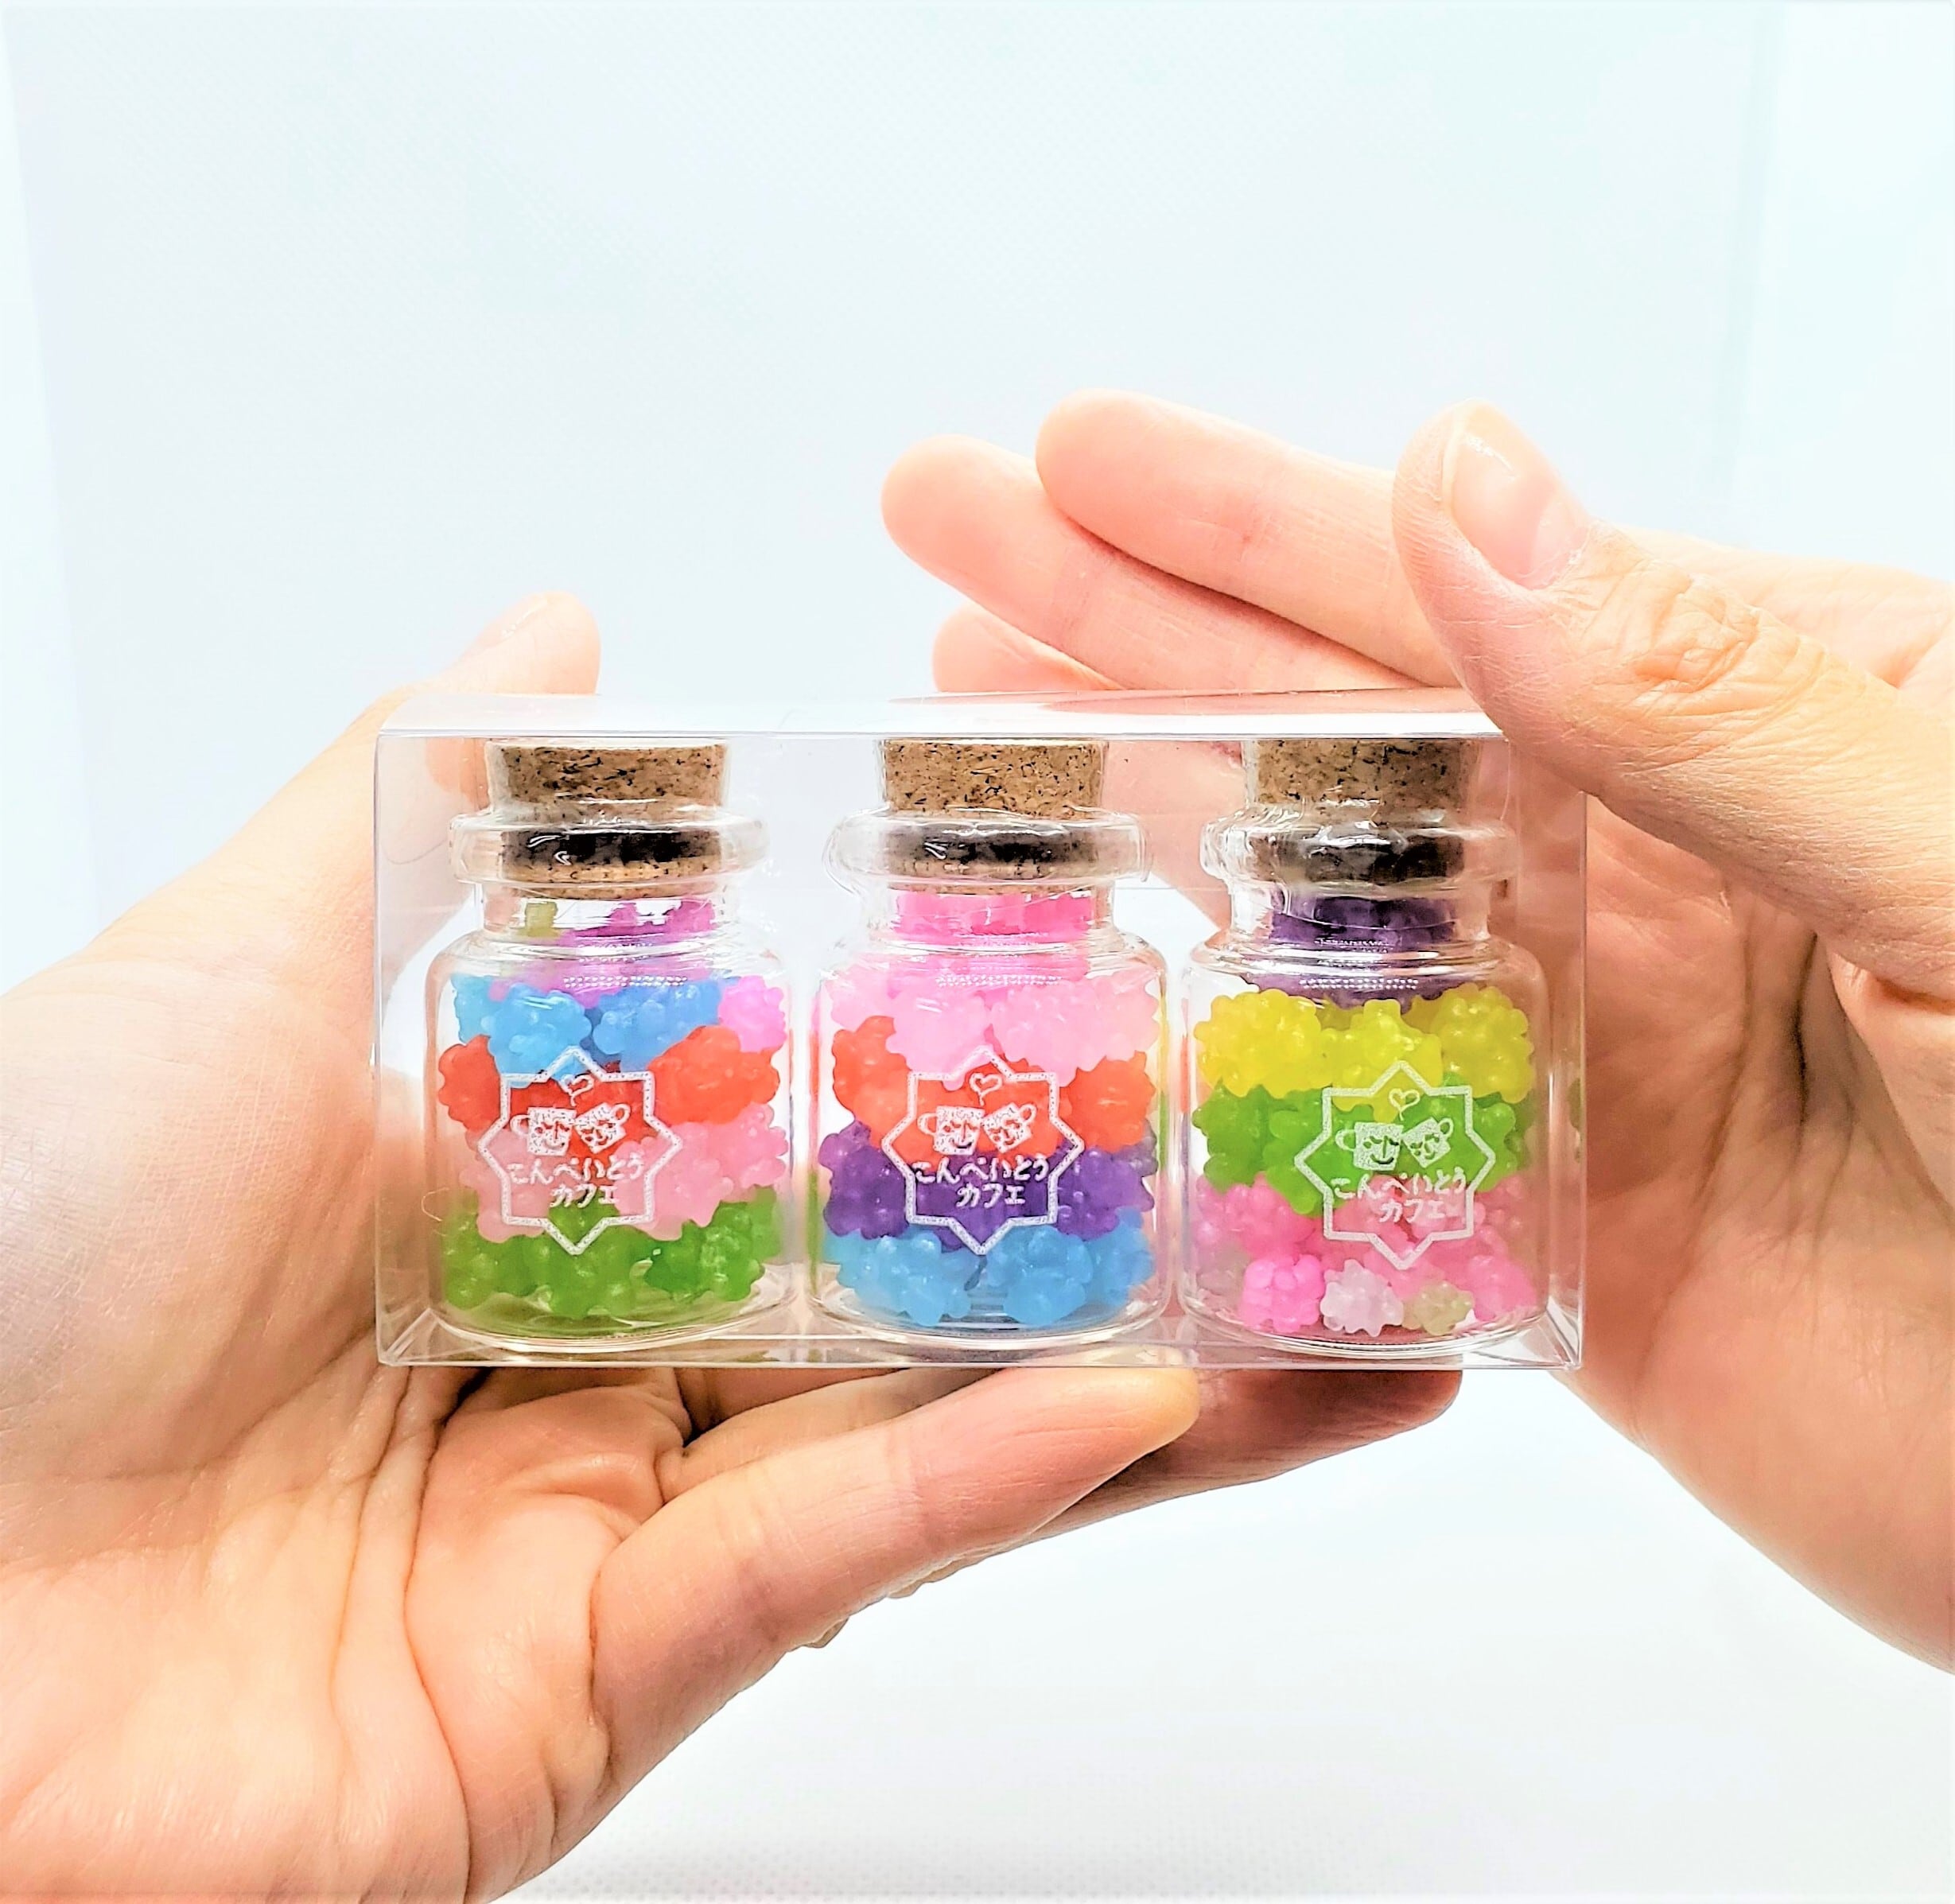 case～　with　小ビン３つセット（クリアケース付き）～Small　a　special　bottle　pieces　恋寿華堂オンラインショップ